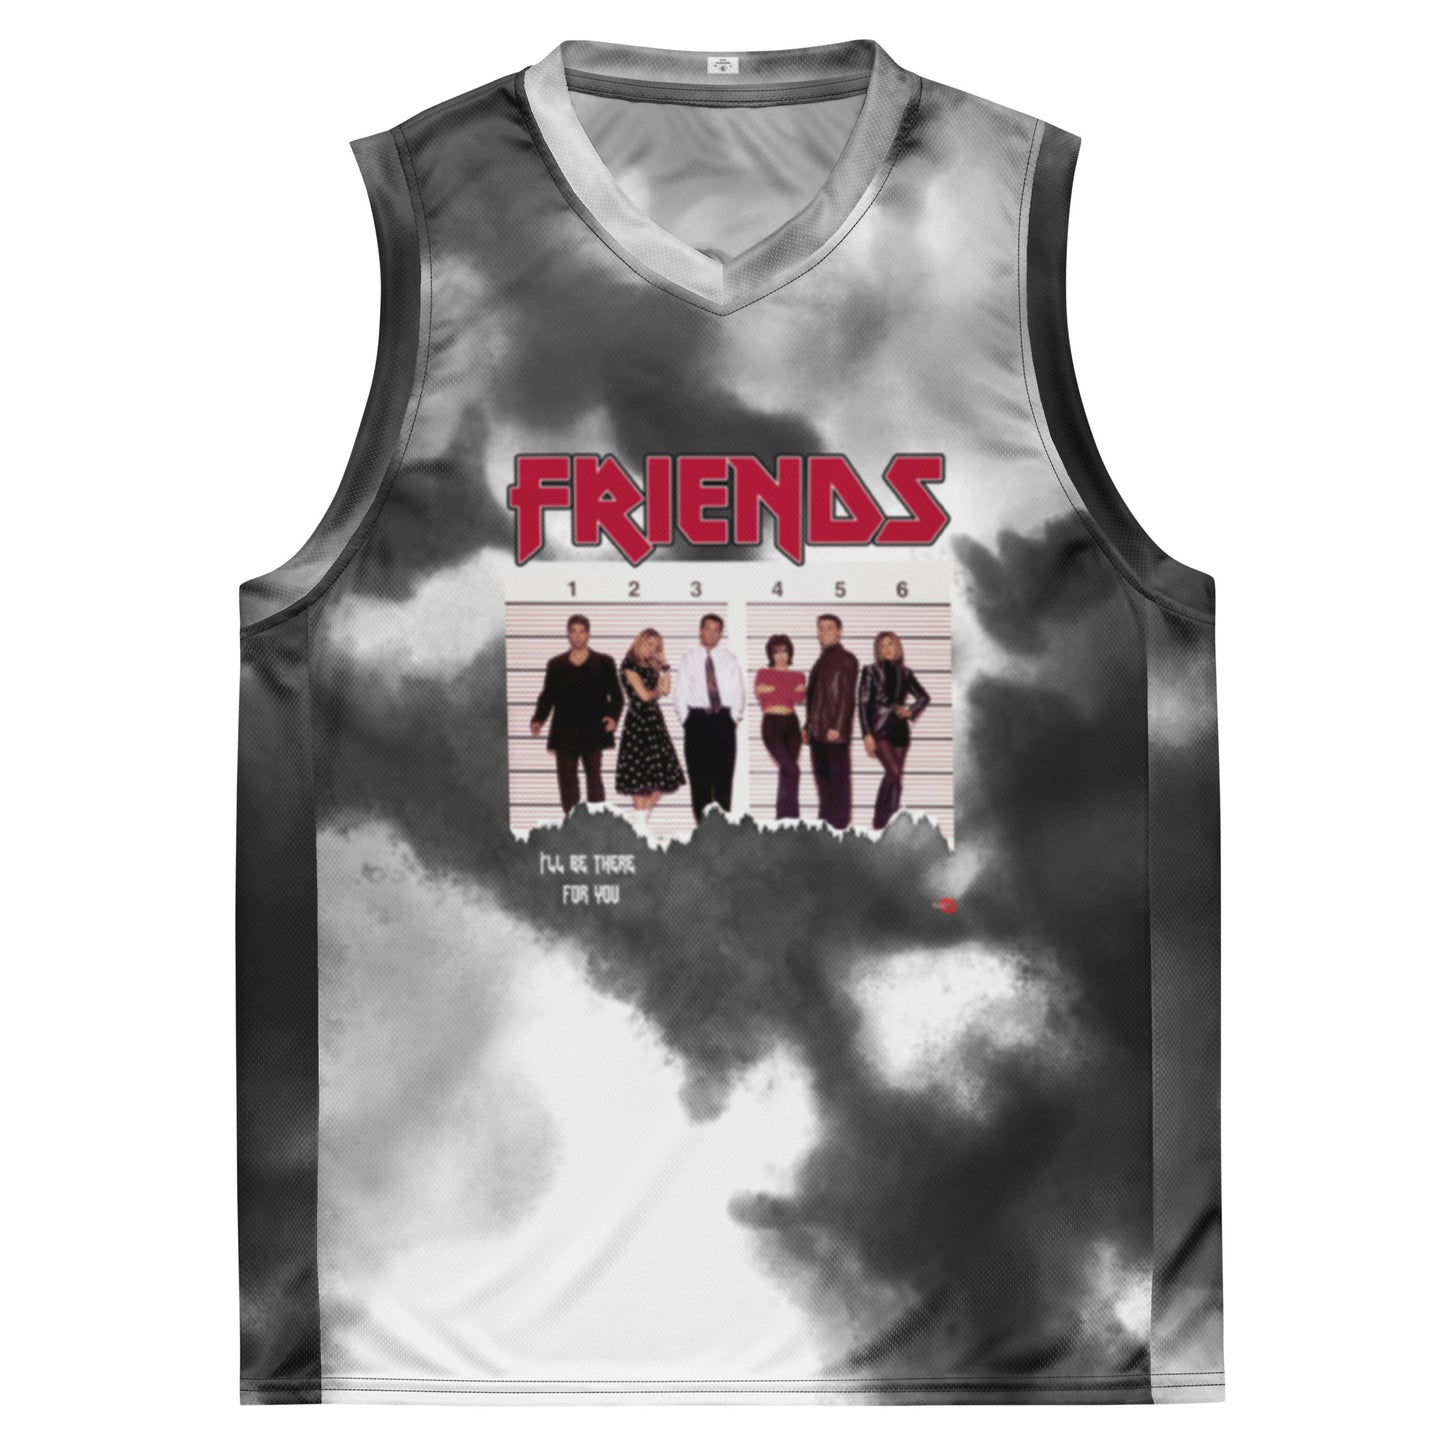 Friends 'Band' Tour 94 KiSS Recycled unisex basketball jersey - New York City Rock style